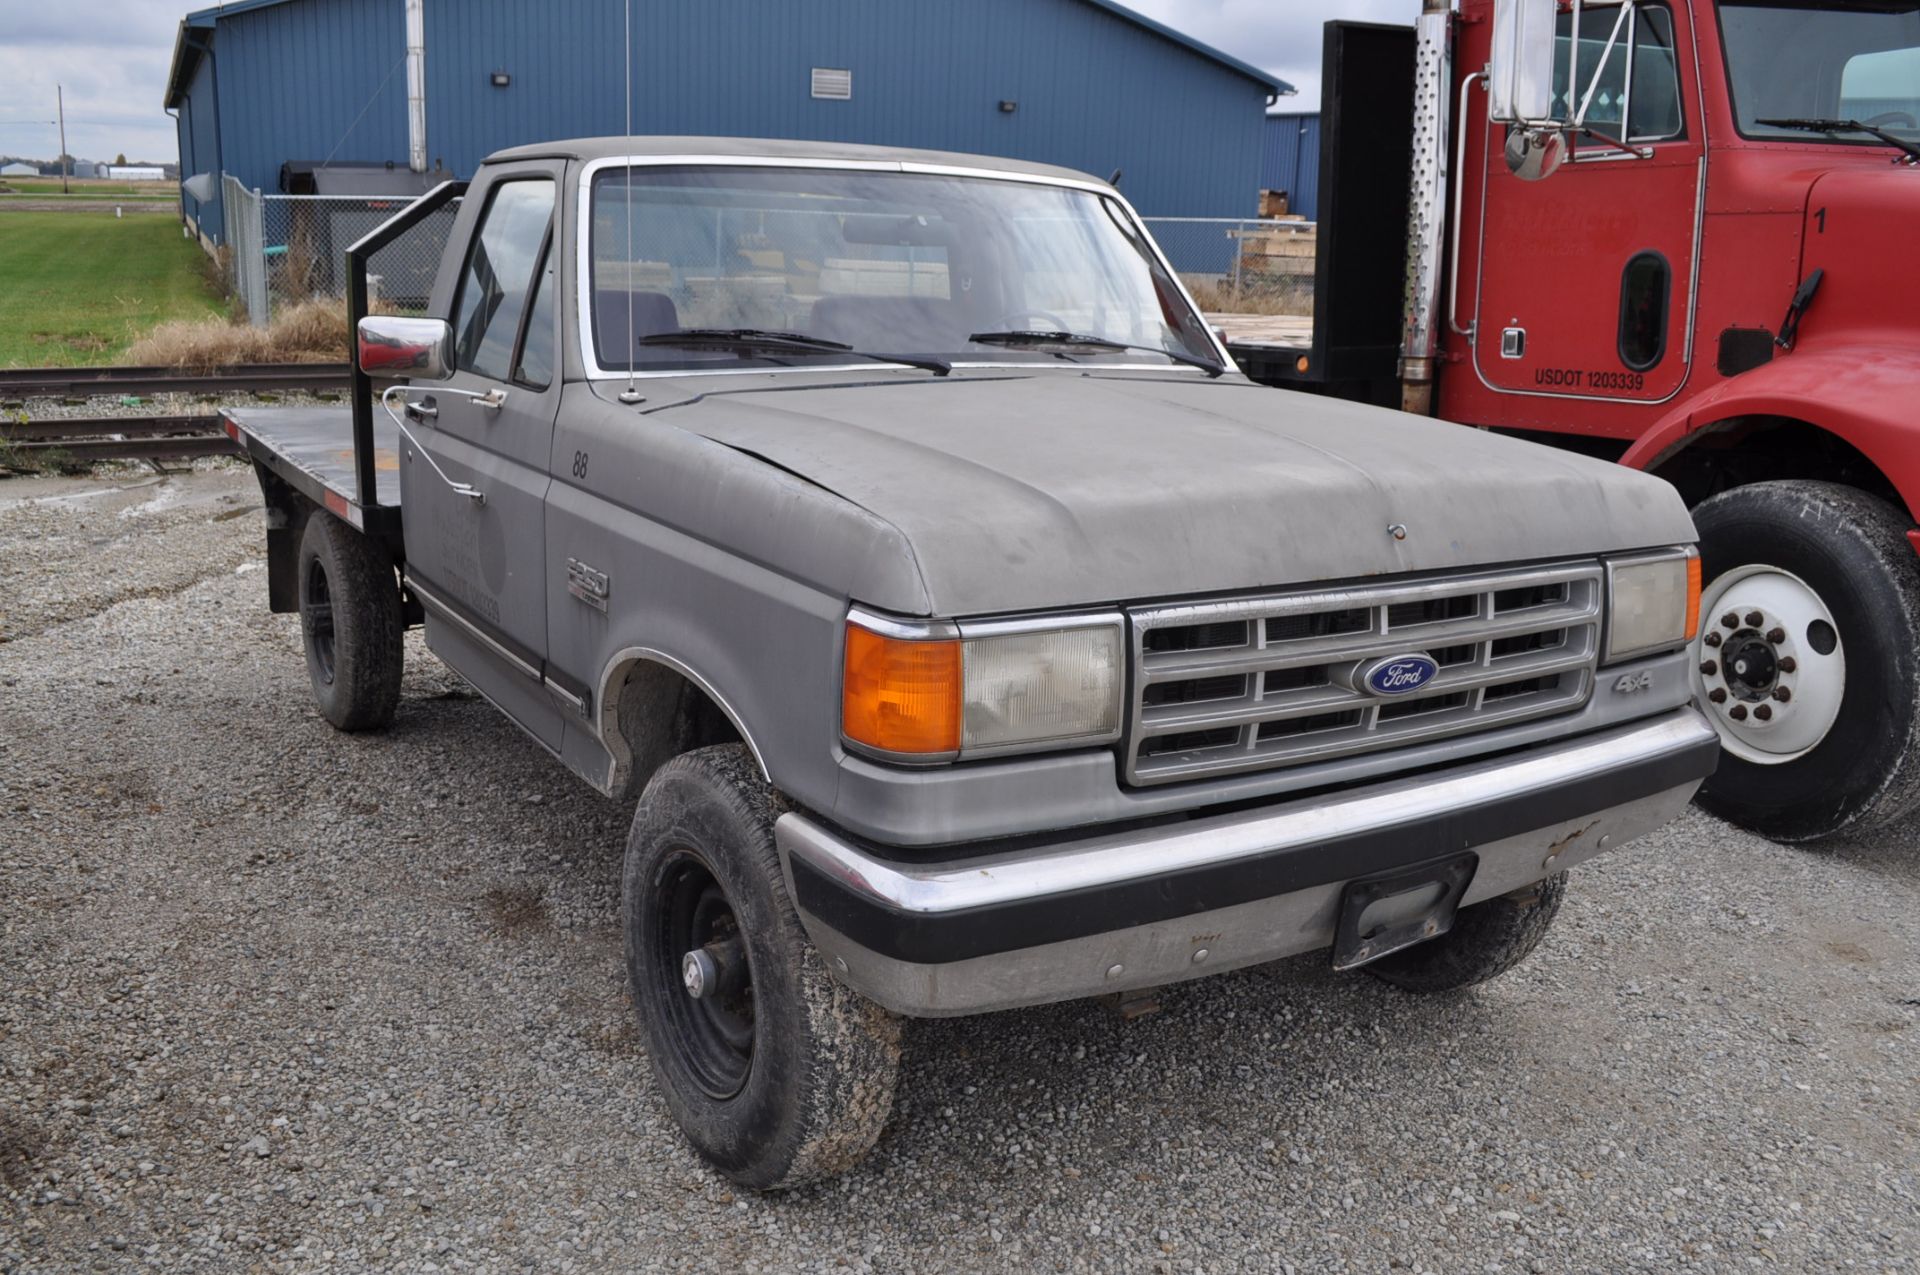 1988 Ford F-250, 4x4, V-8 gas, auto, reg cab, flatbed, shows 44,935 miles, VIN 1FTHF26H7JNA61411 - Image 5 of 11